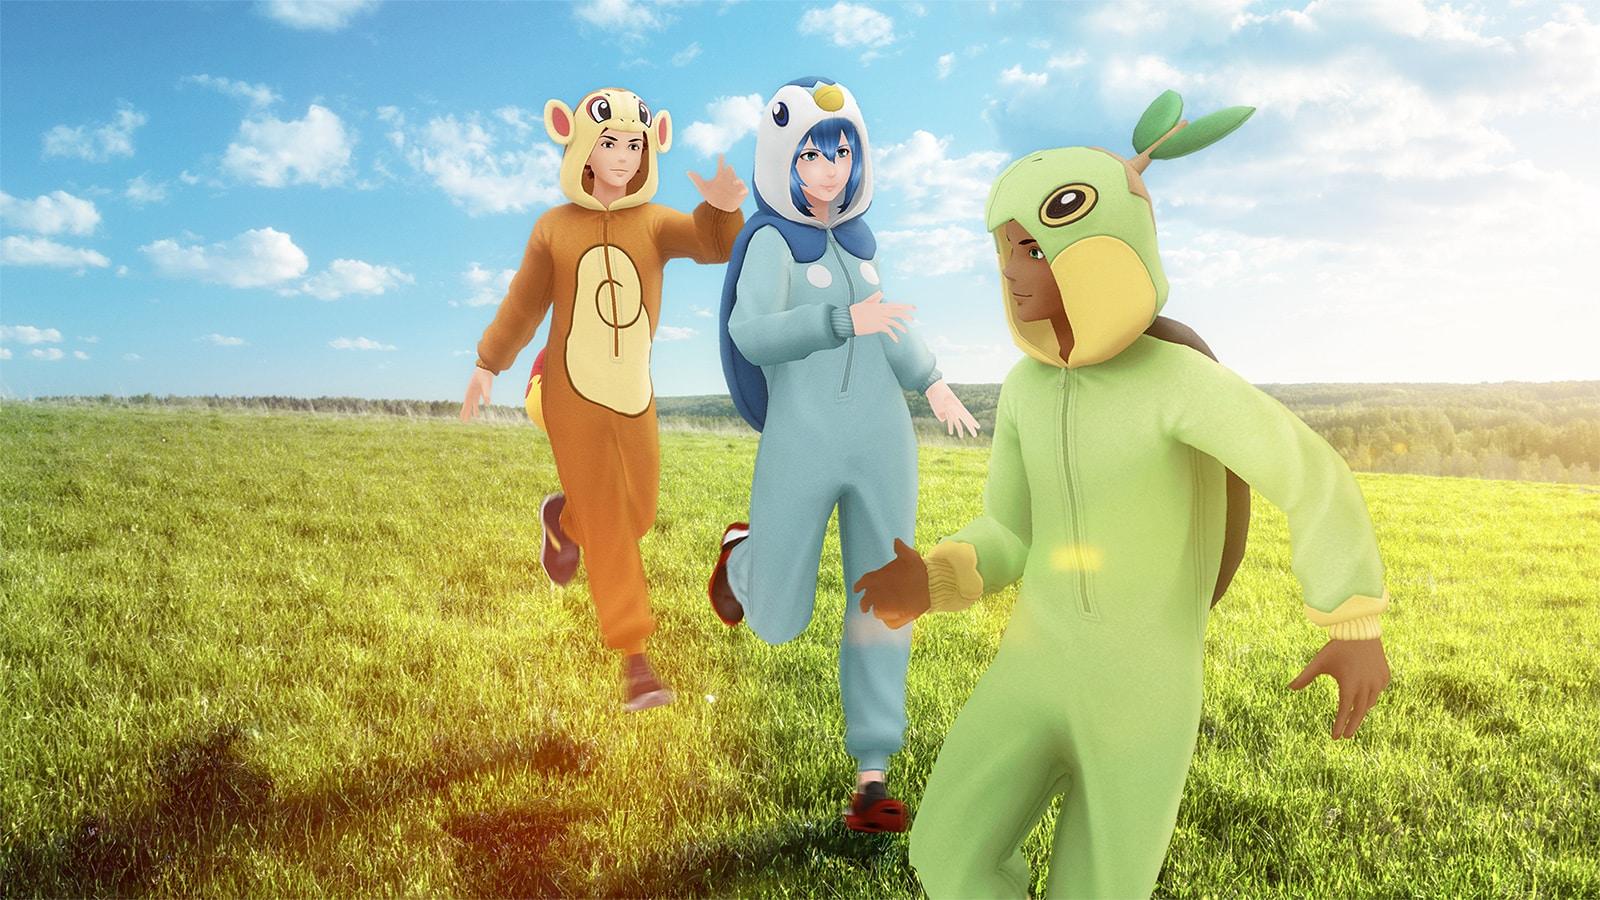 Trainers wearing BD & SP themed costumes in Pokemon Go